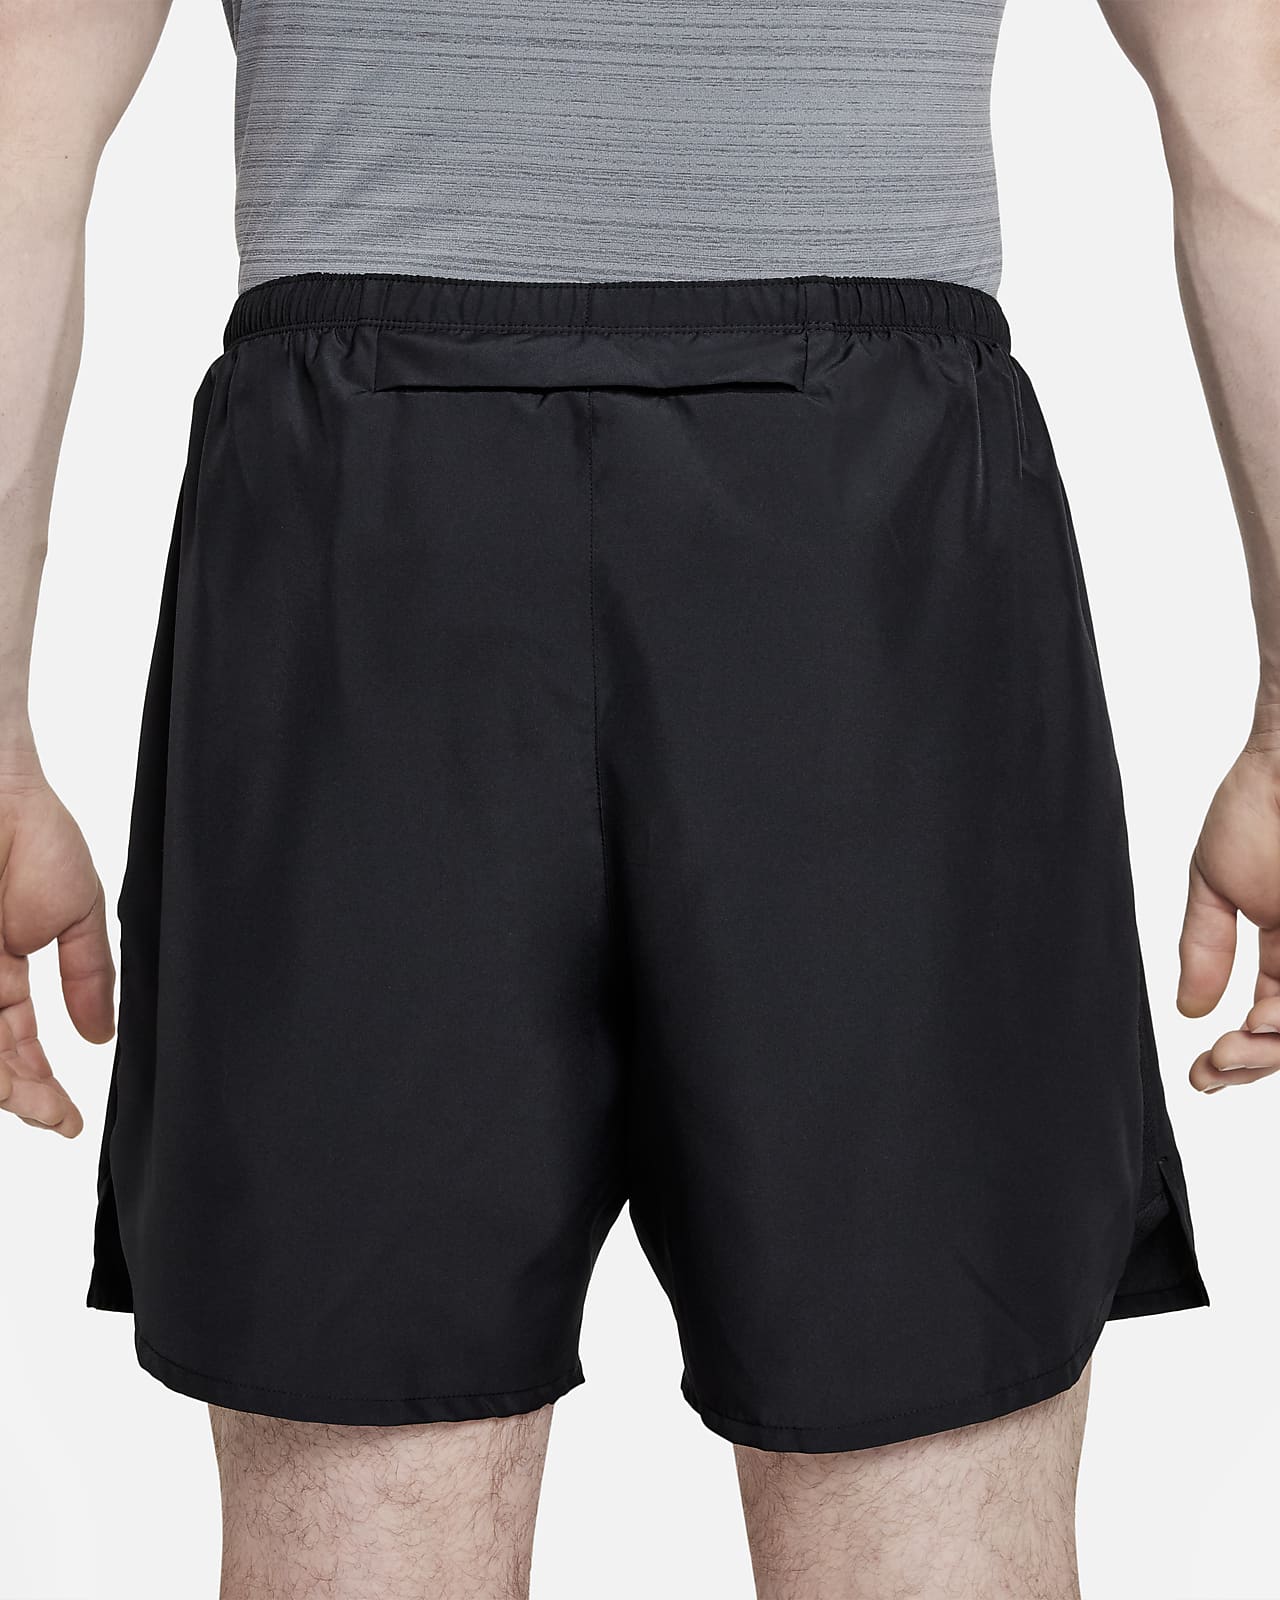 Men's sports shorts with inner tights (brand new), Women's Fashion